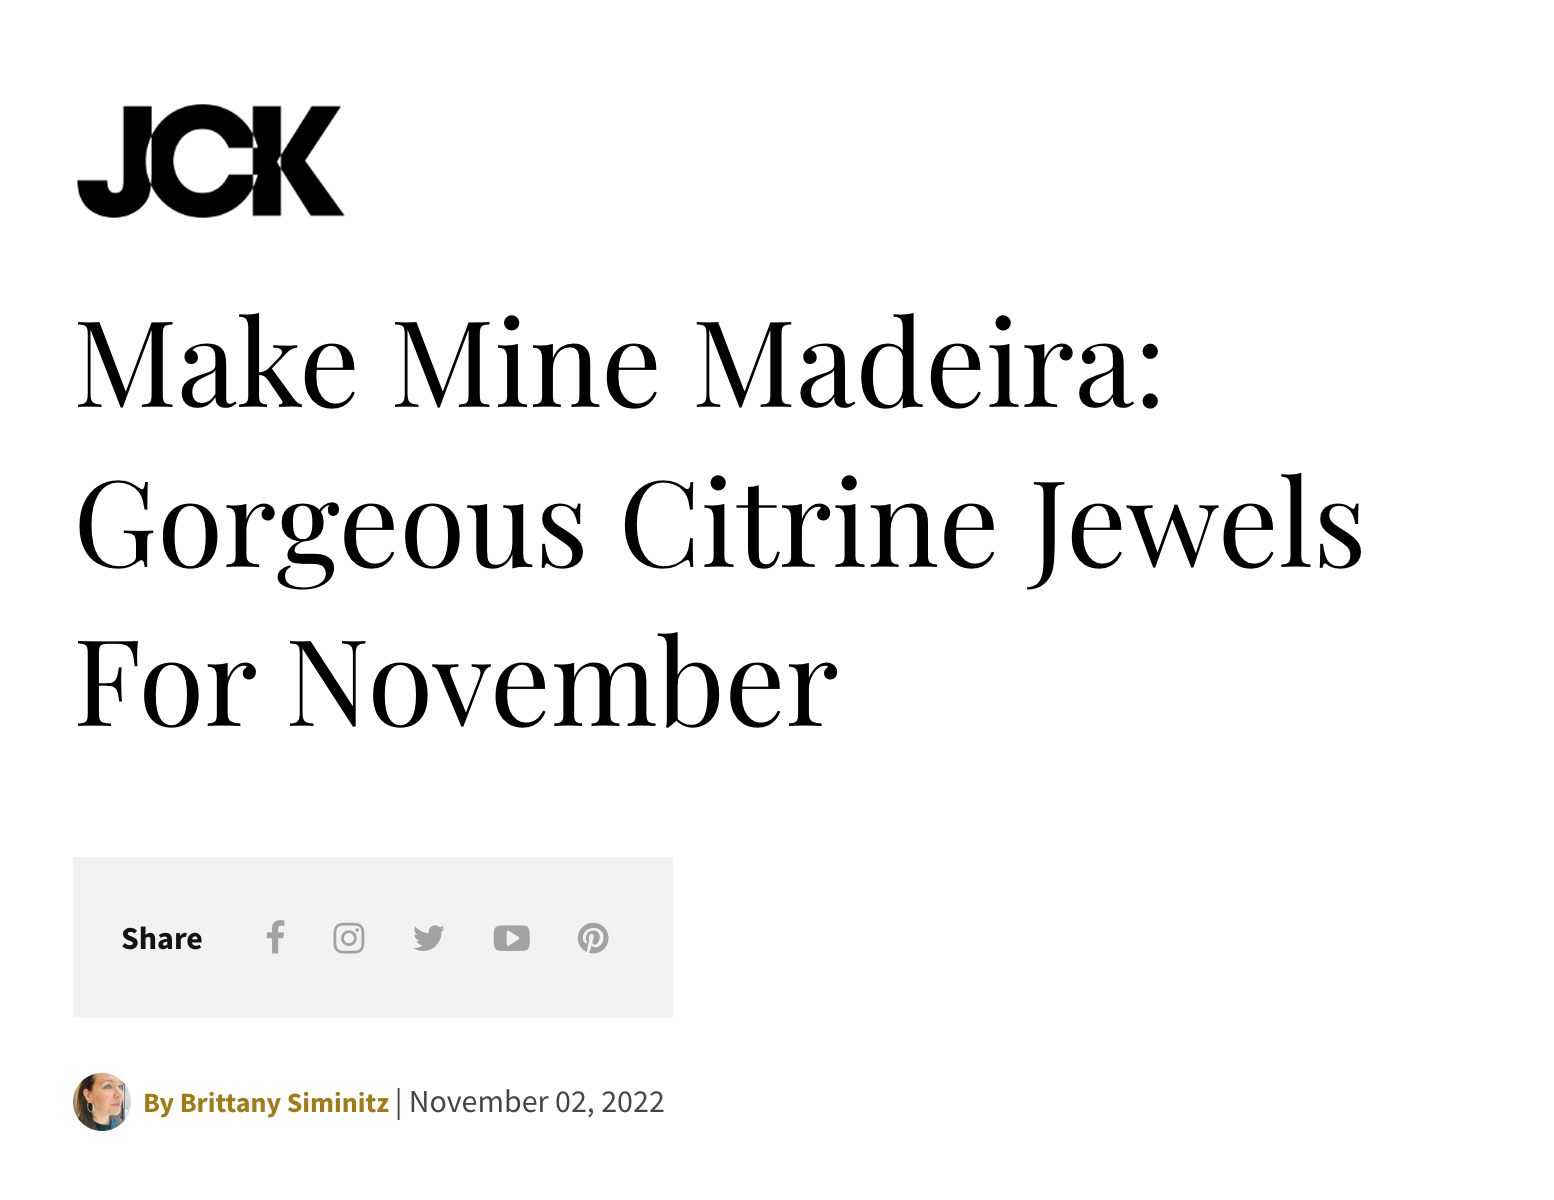 This is the title for an online article by JCK for their pics of jewelry for Novemeber